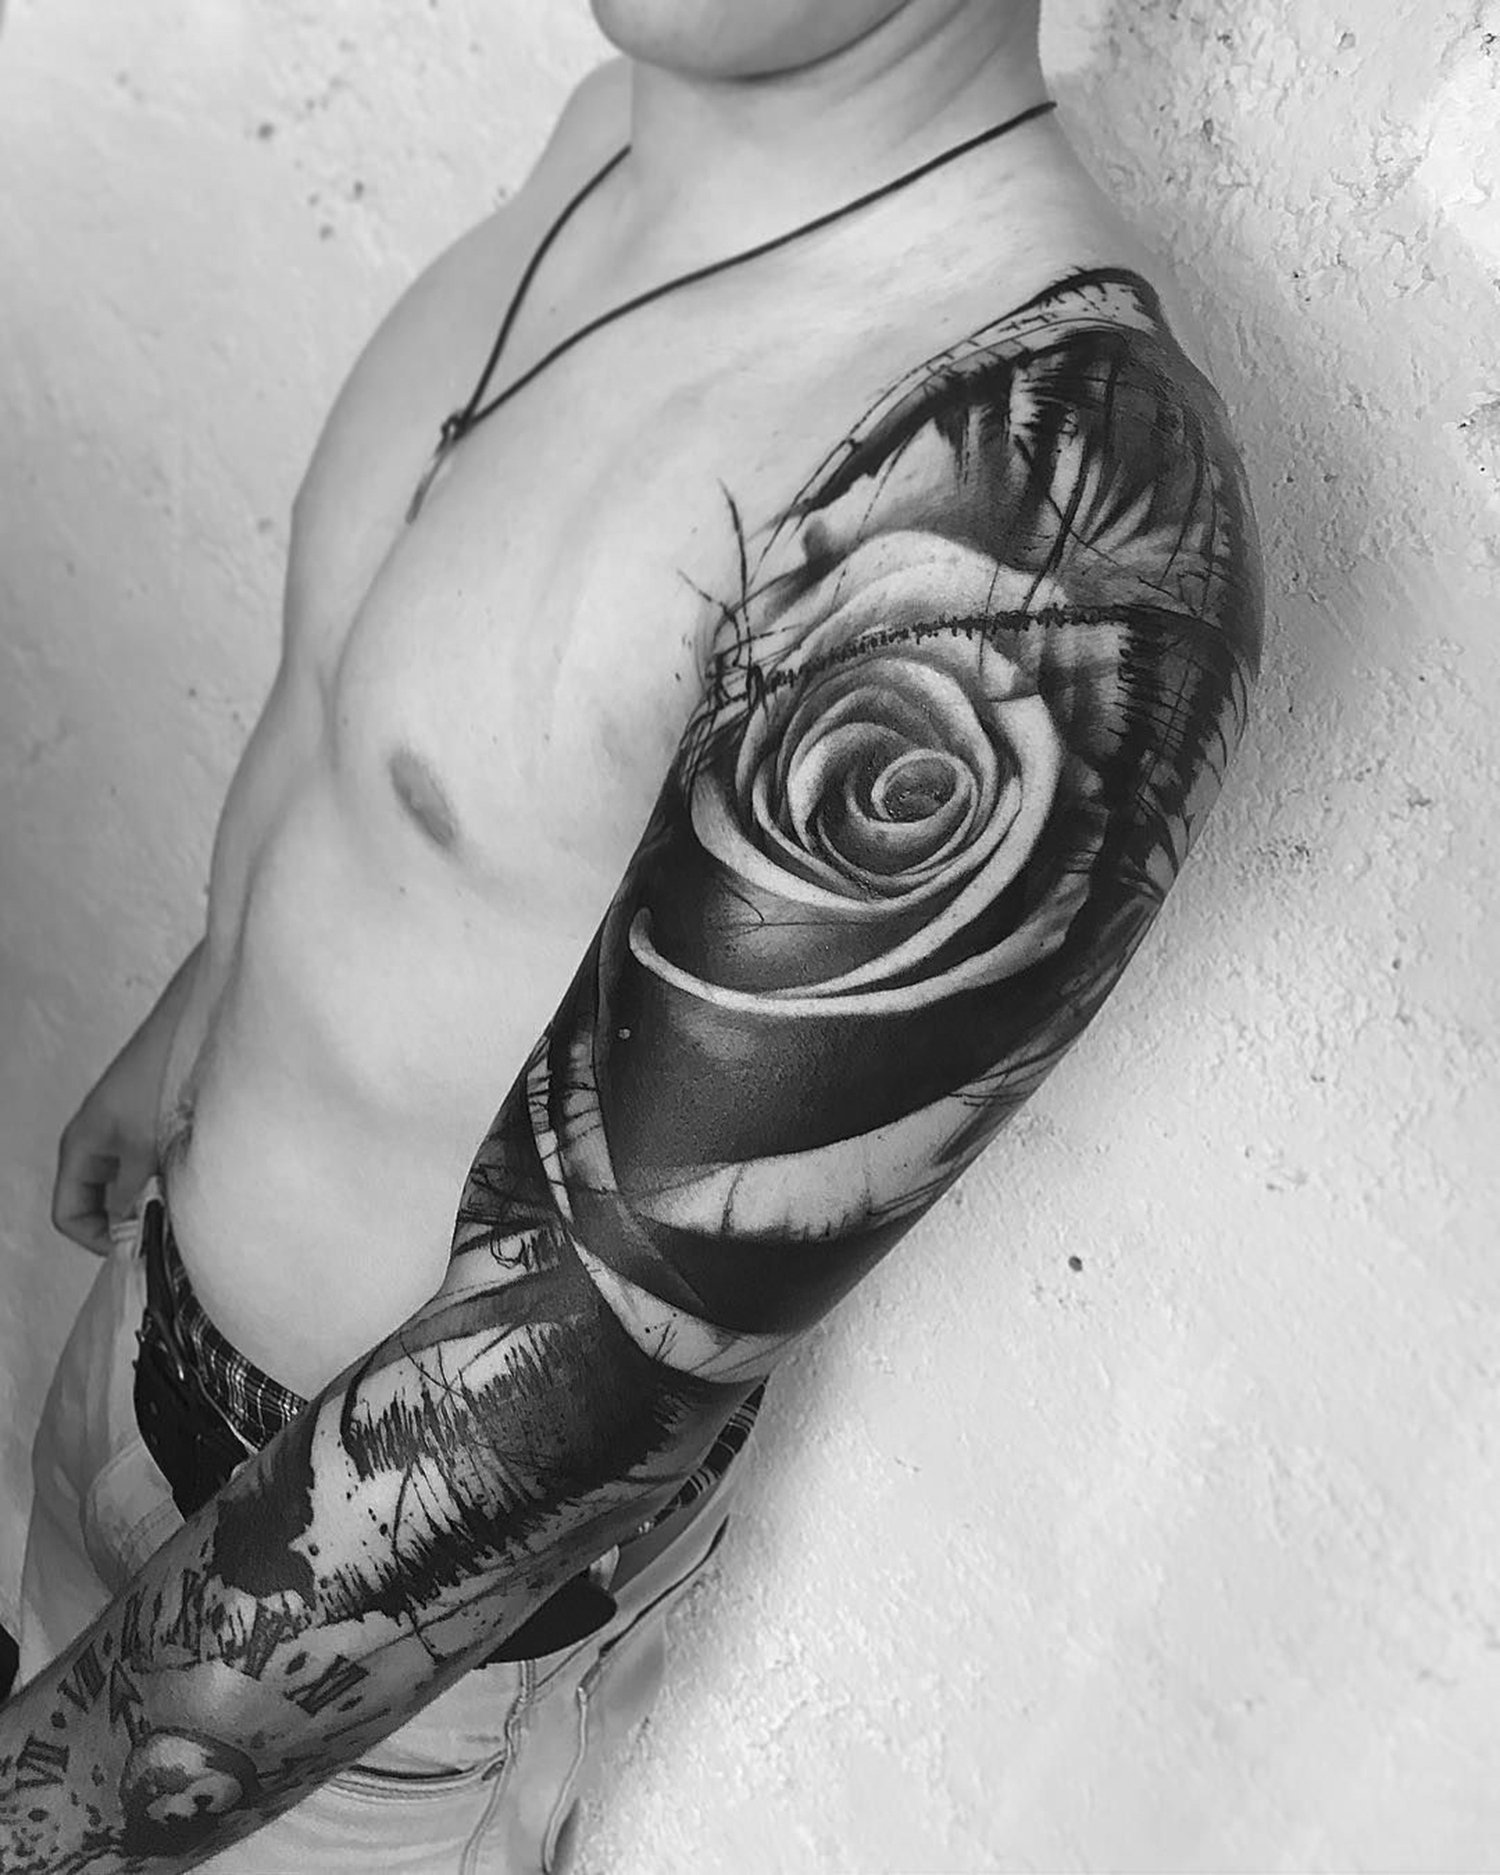 black roses on arm, painting style